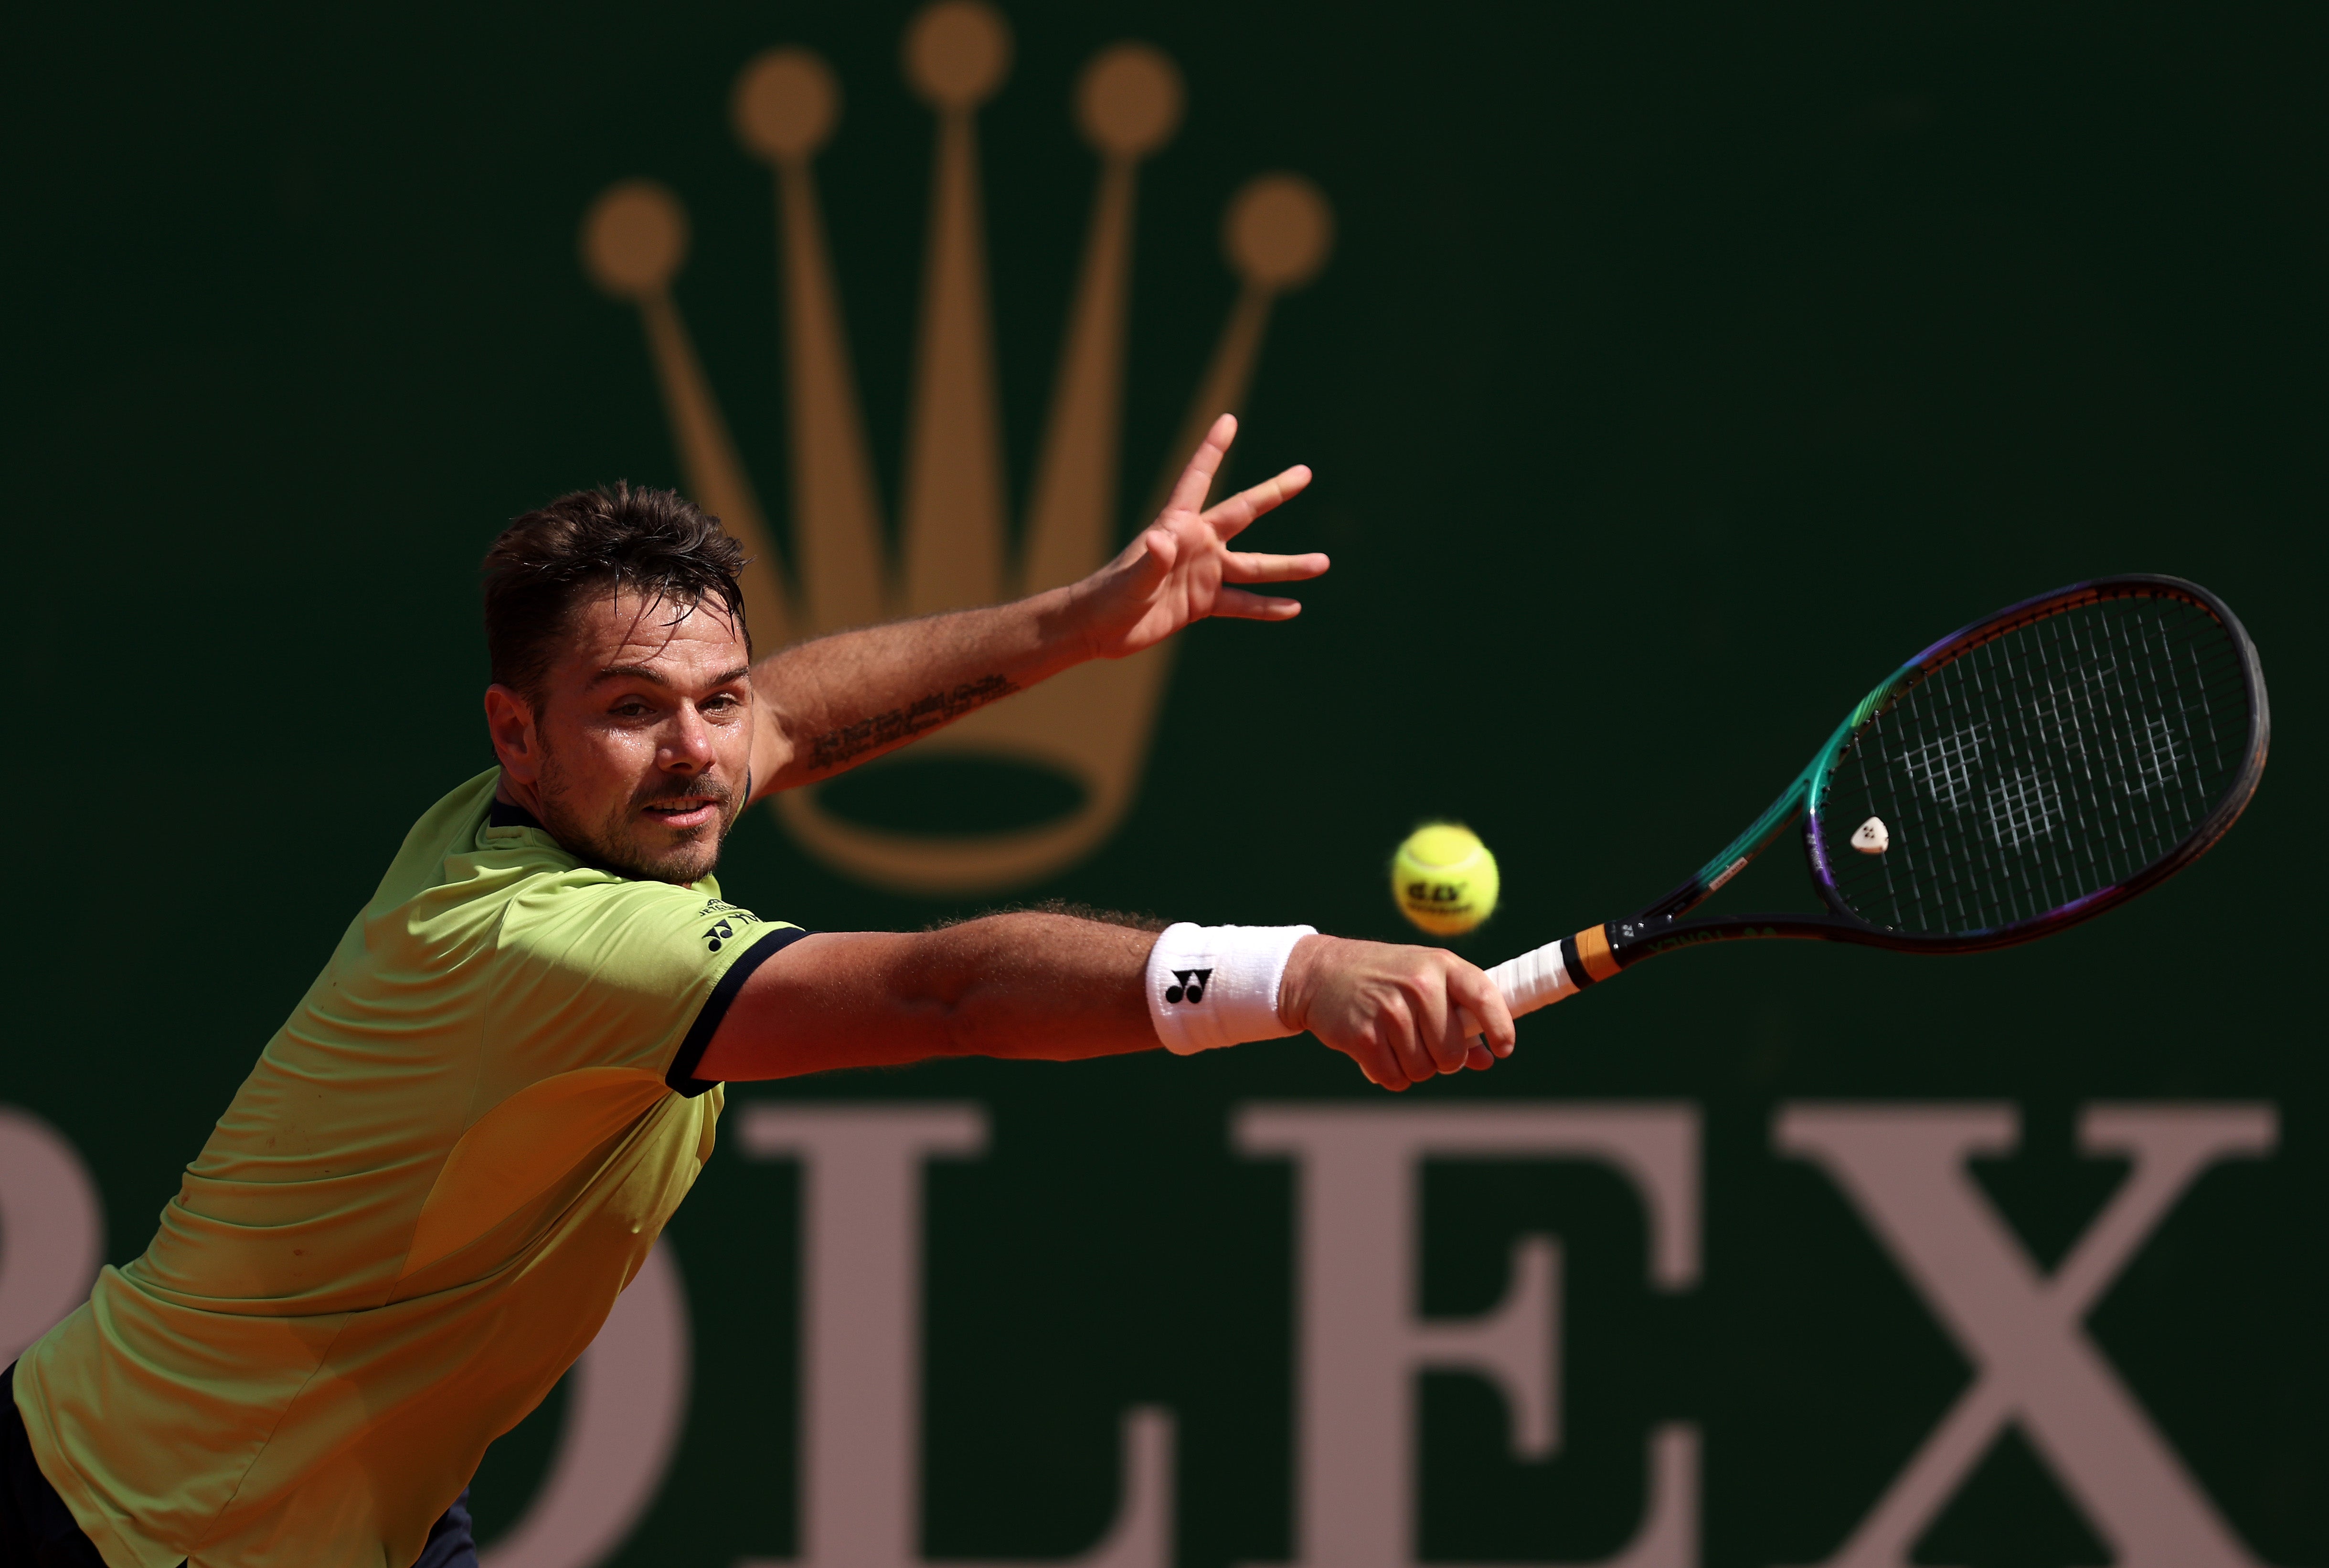 Stan Wawrinka was defeated in three sets in Monte Carlo